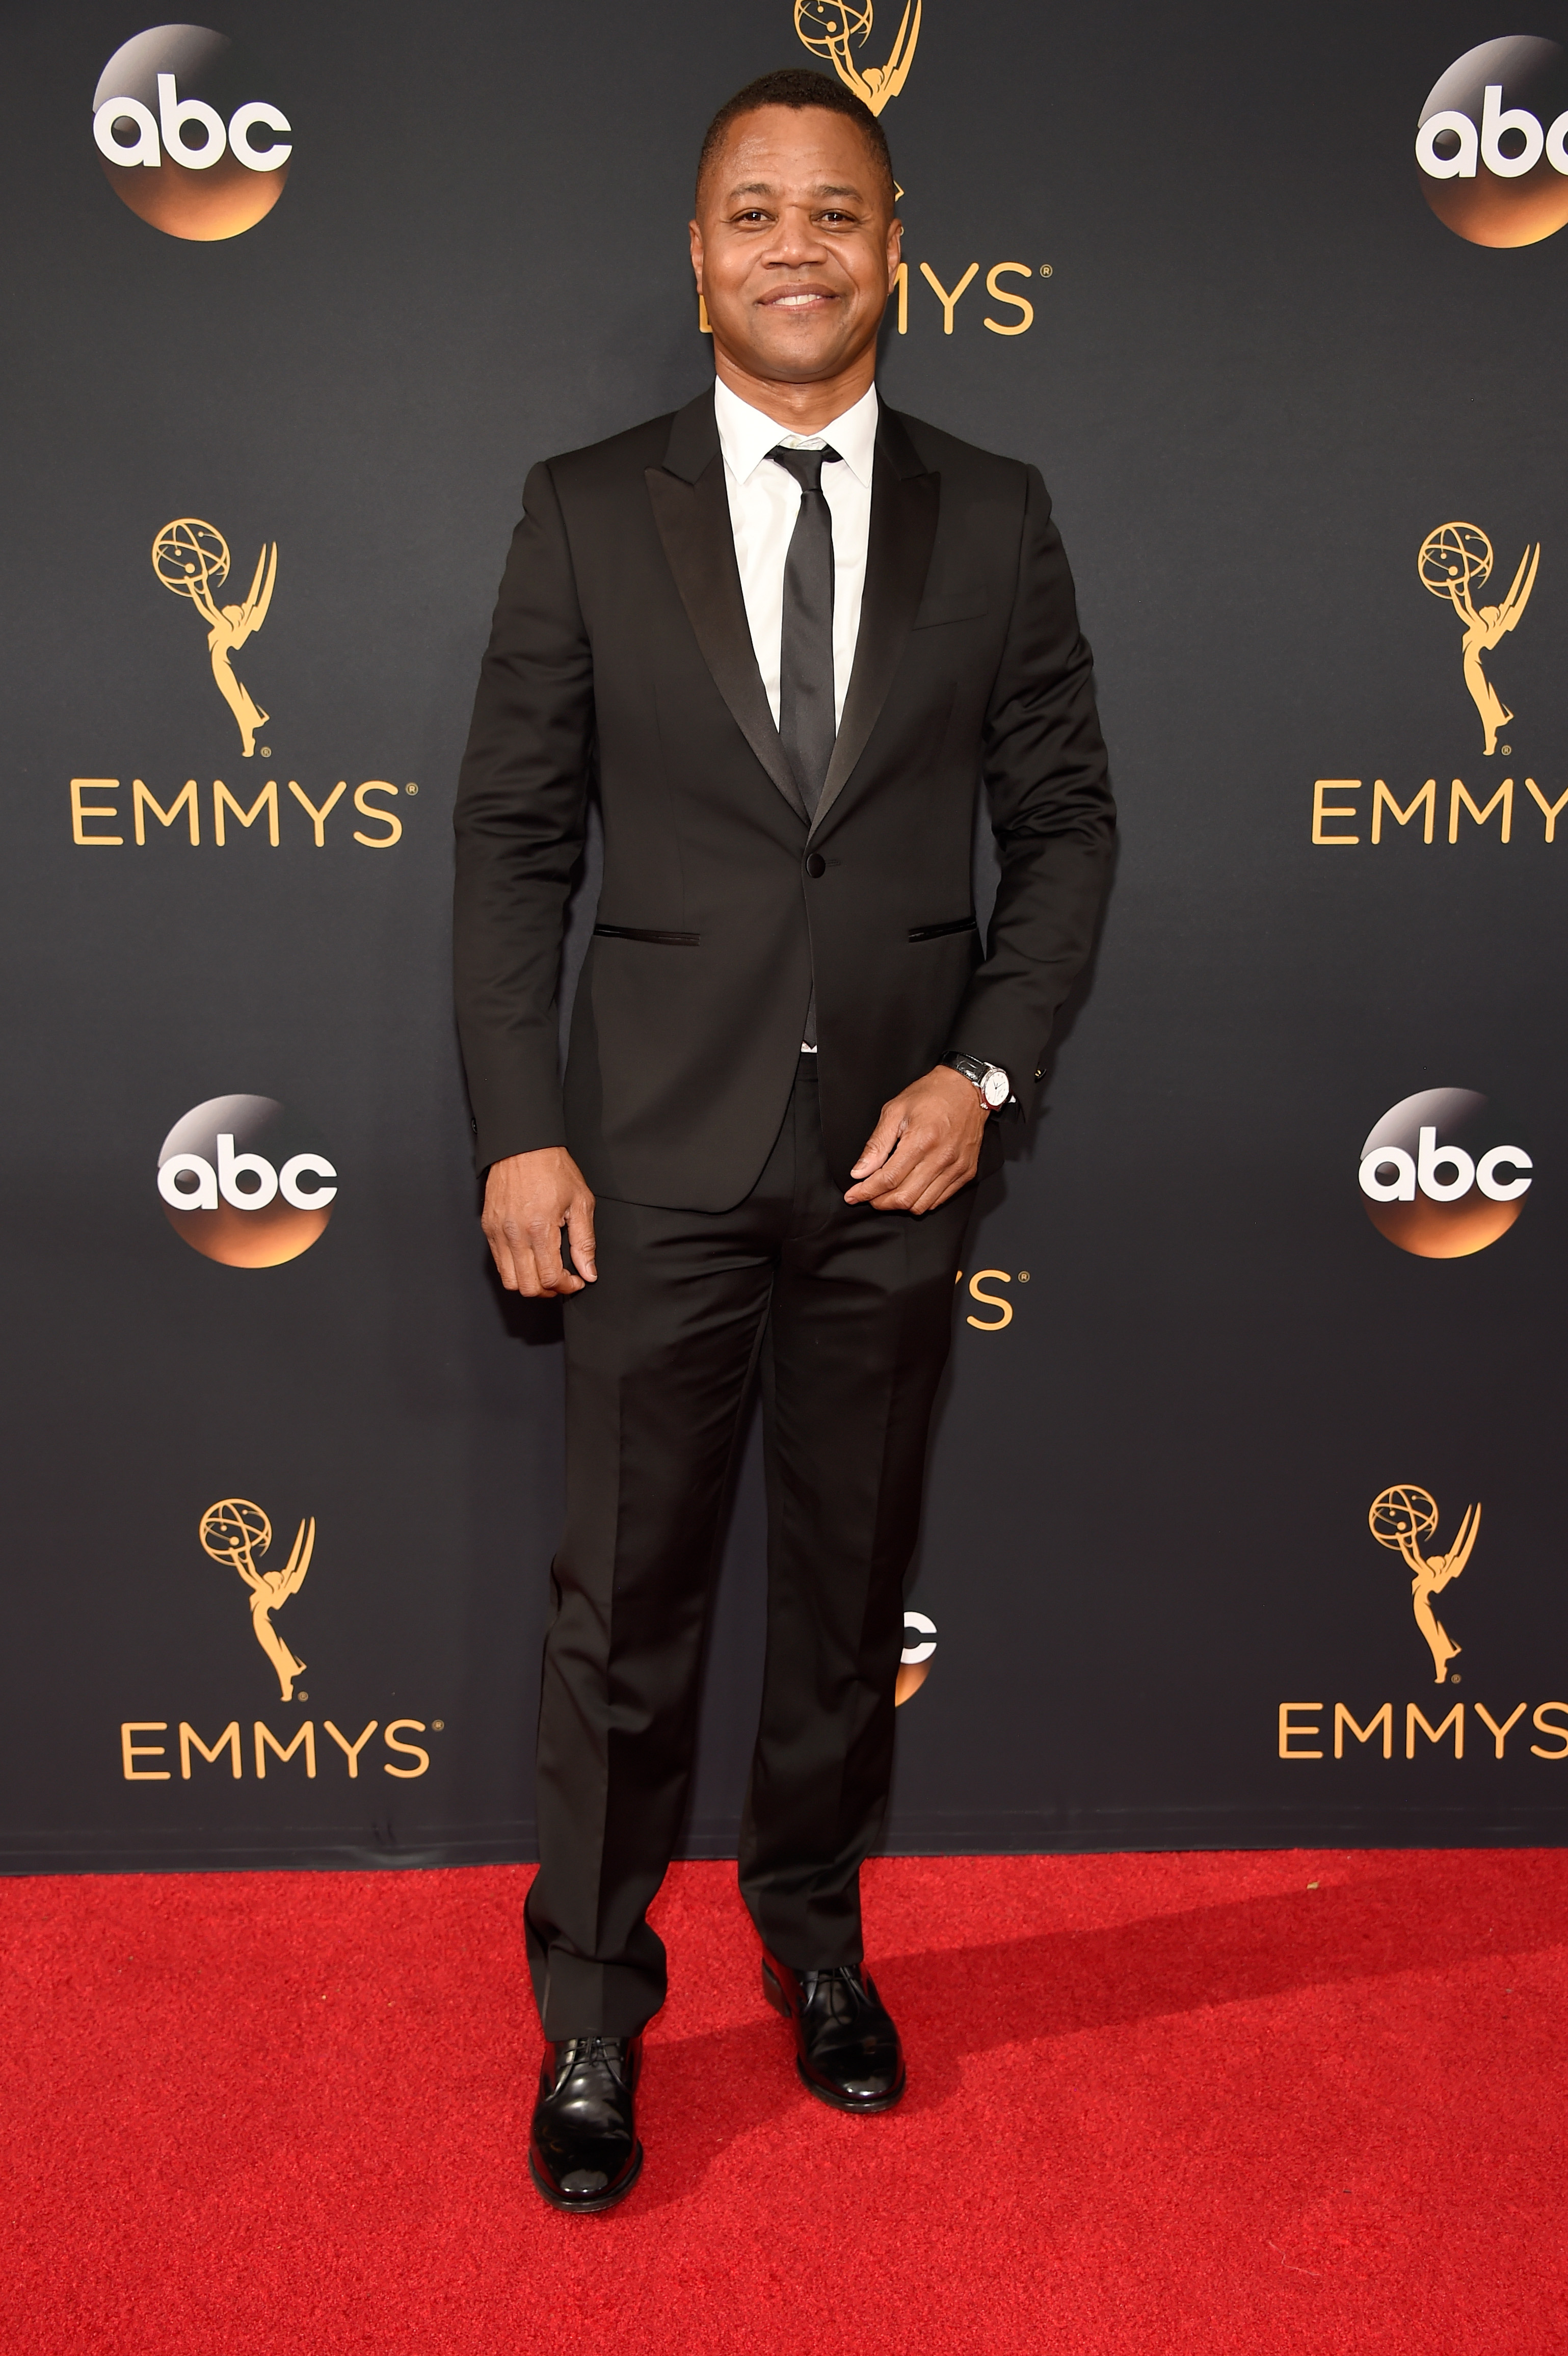 Cuba Gooding, Jr. arrives at the 68th Annual Primetime Emmy Awards at Microsoft Theater on Sept. 18, 2016 in Los Angeles.